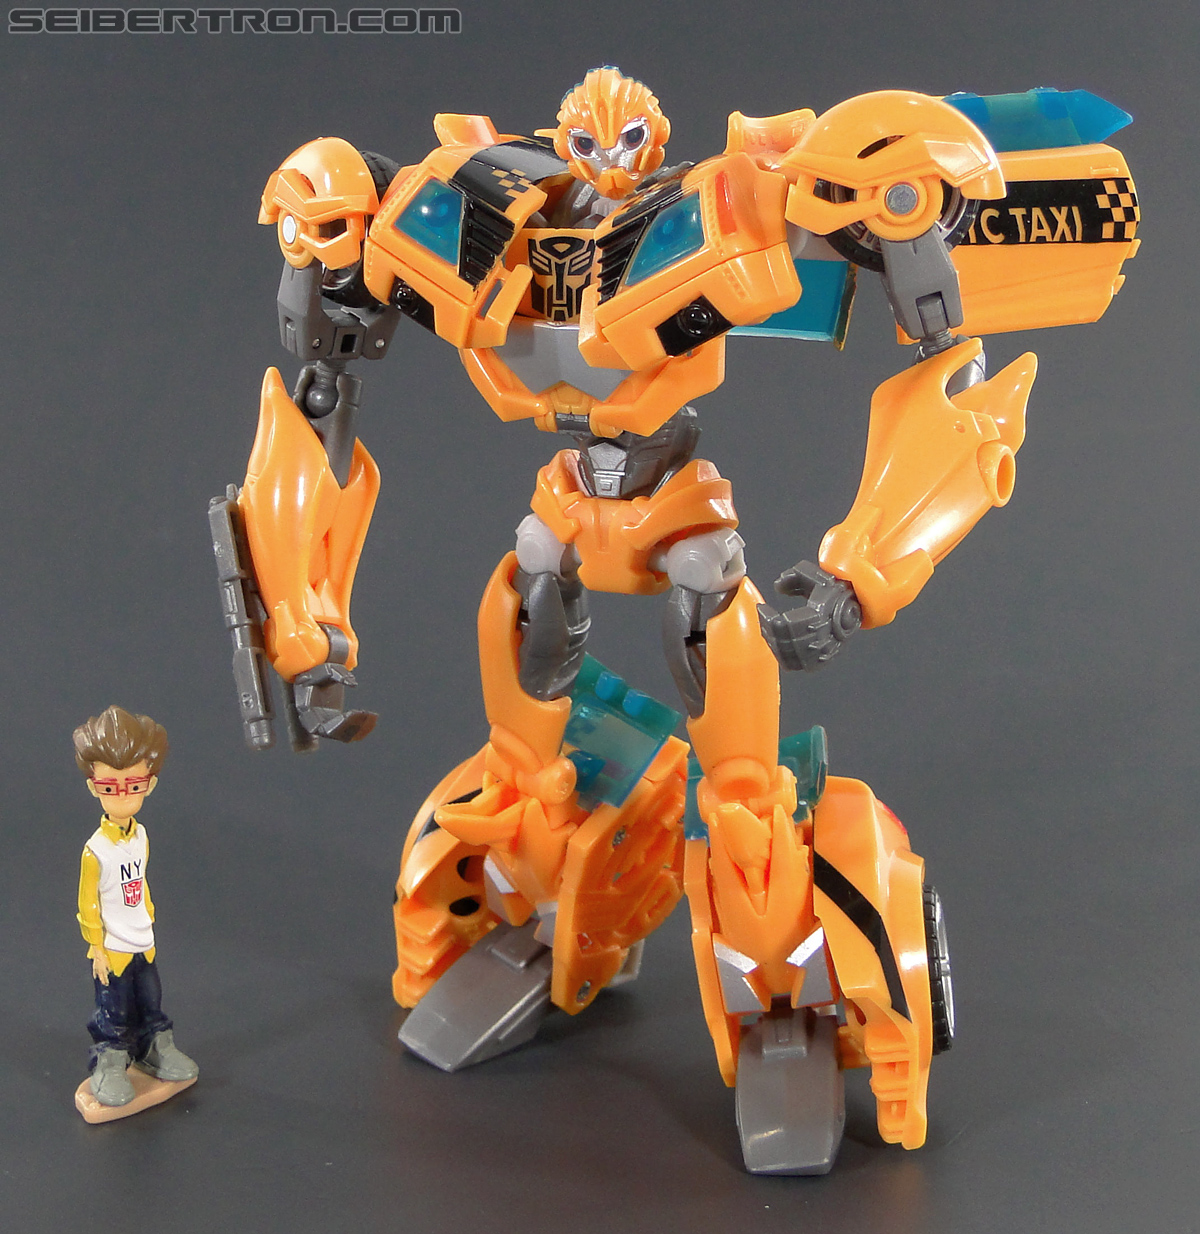 Transformers Prime: First Edition Bumblebee (NYCC) (Image #161 of 185)